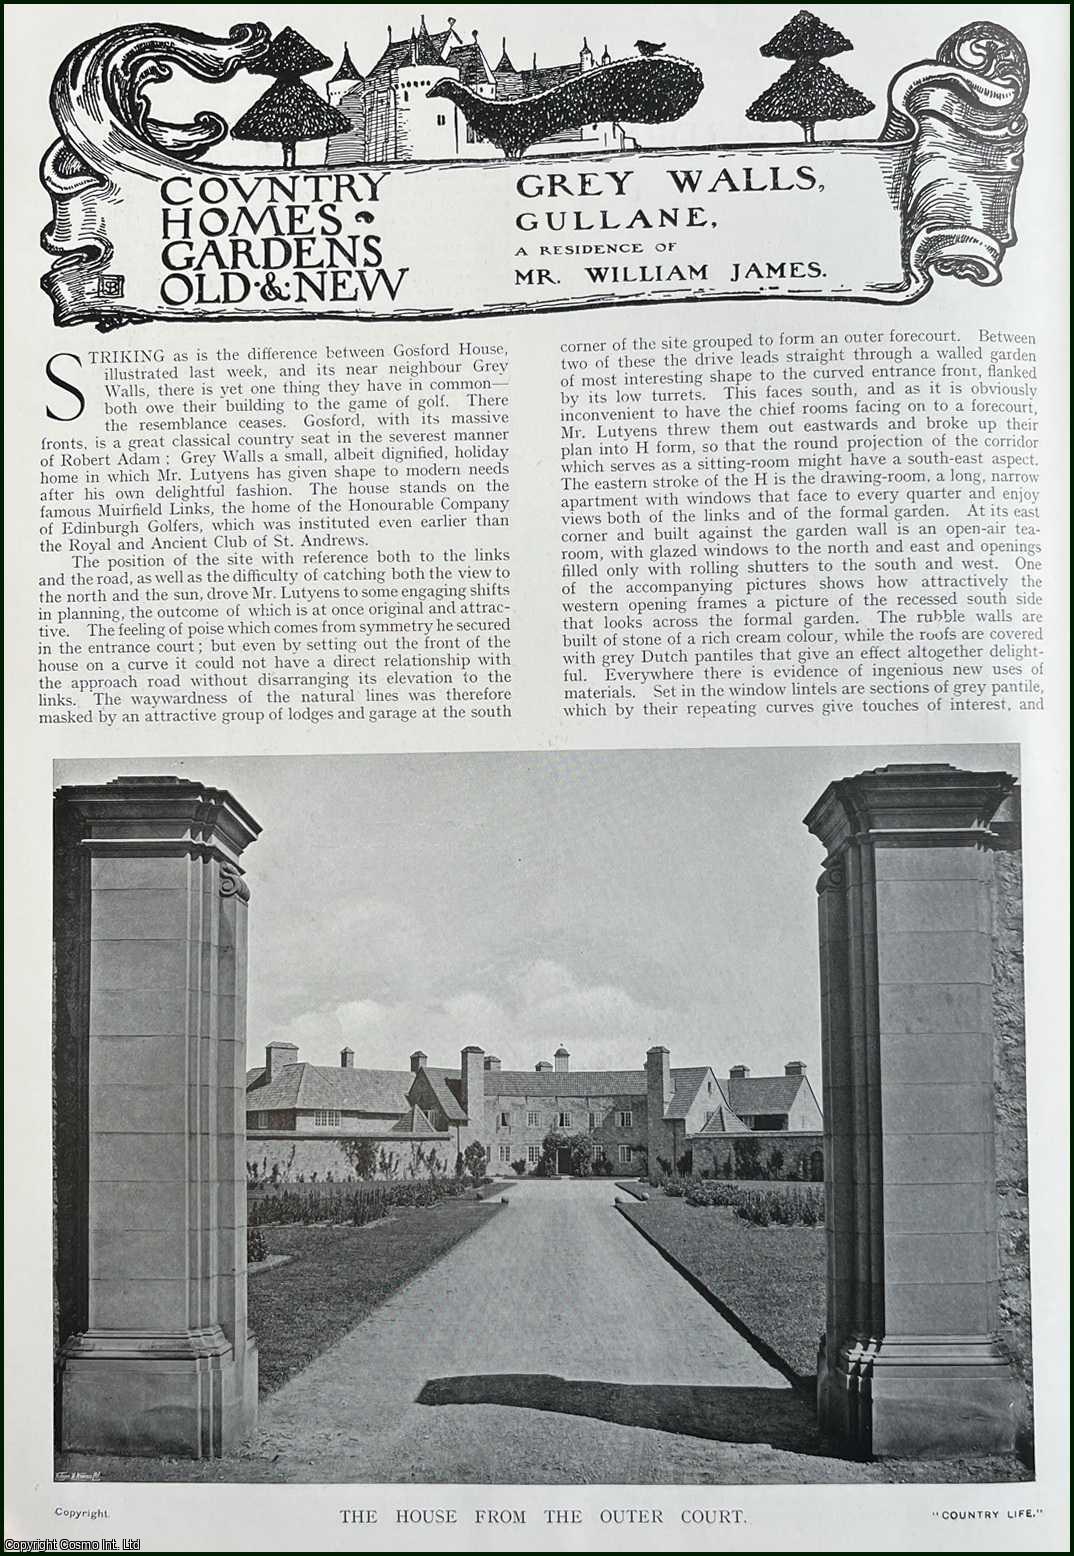 Country Life Magazine - Grey Walls, Gullane. Several pictures and accompanying text, removed from an original issue of Country Life Magazine, 1911.